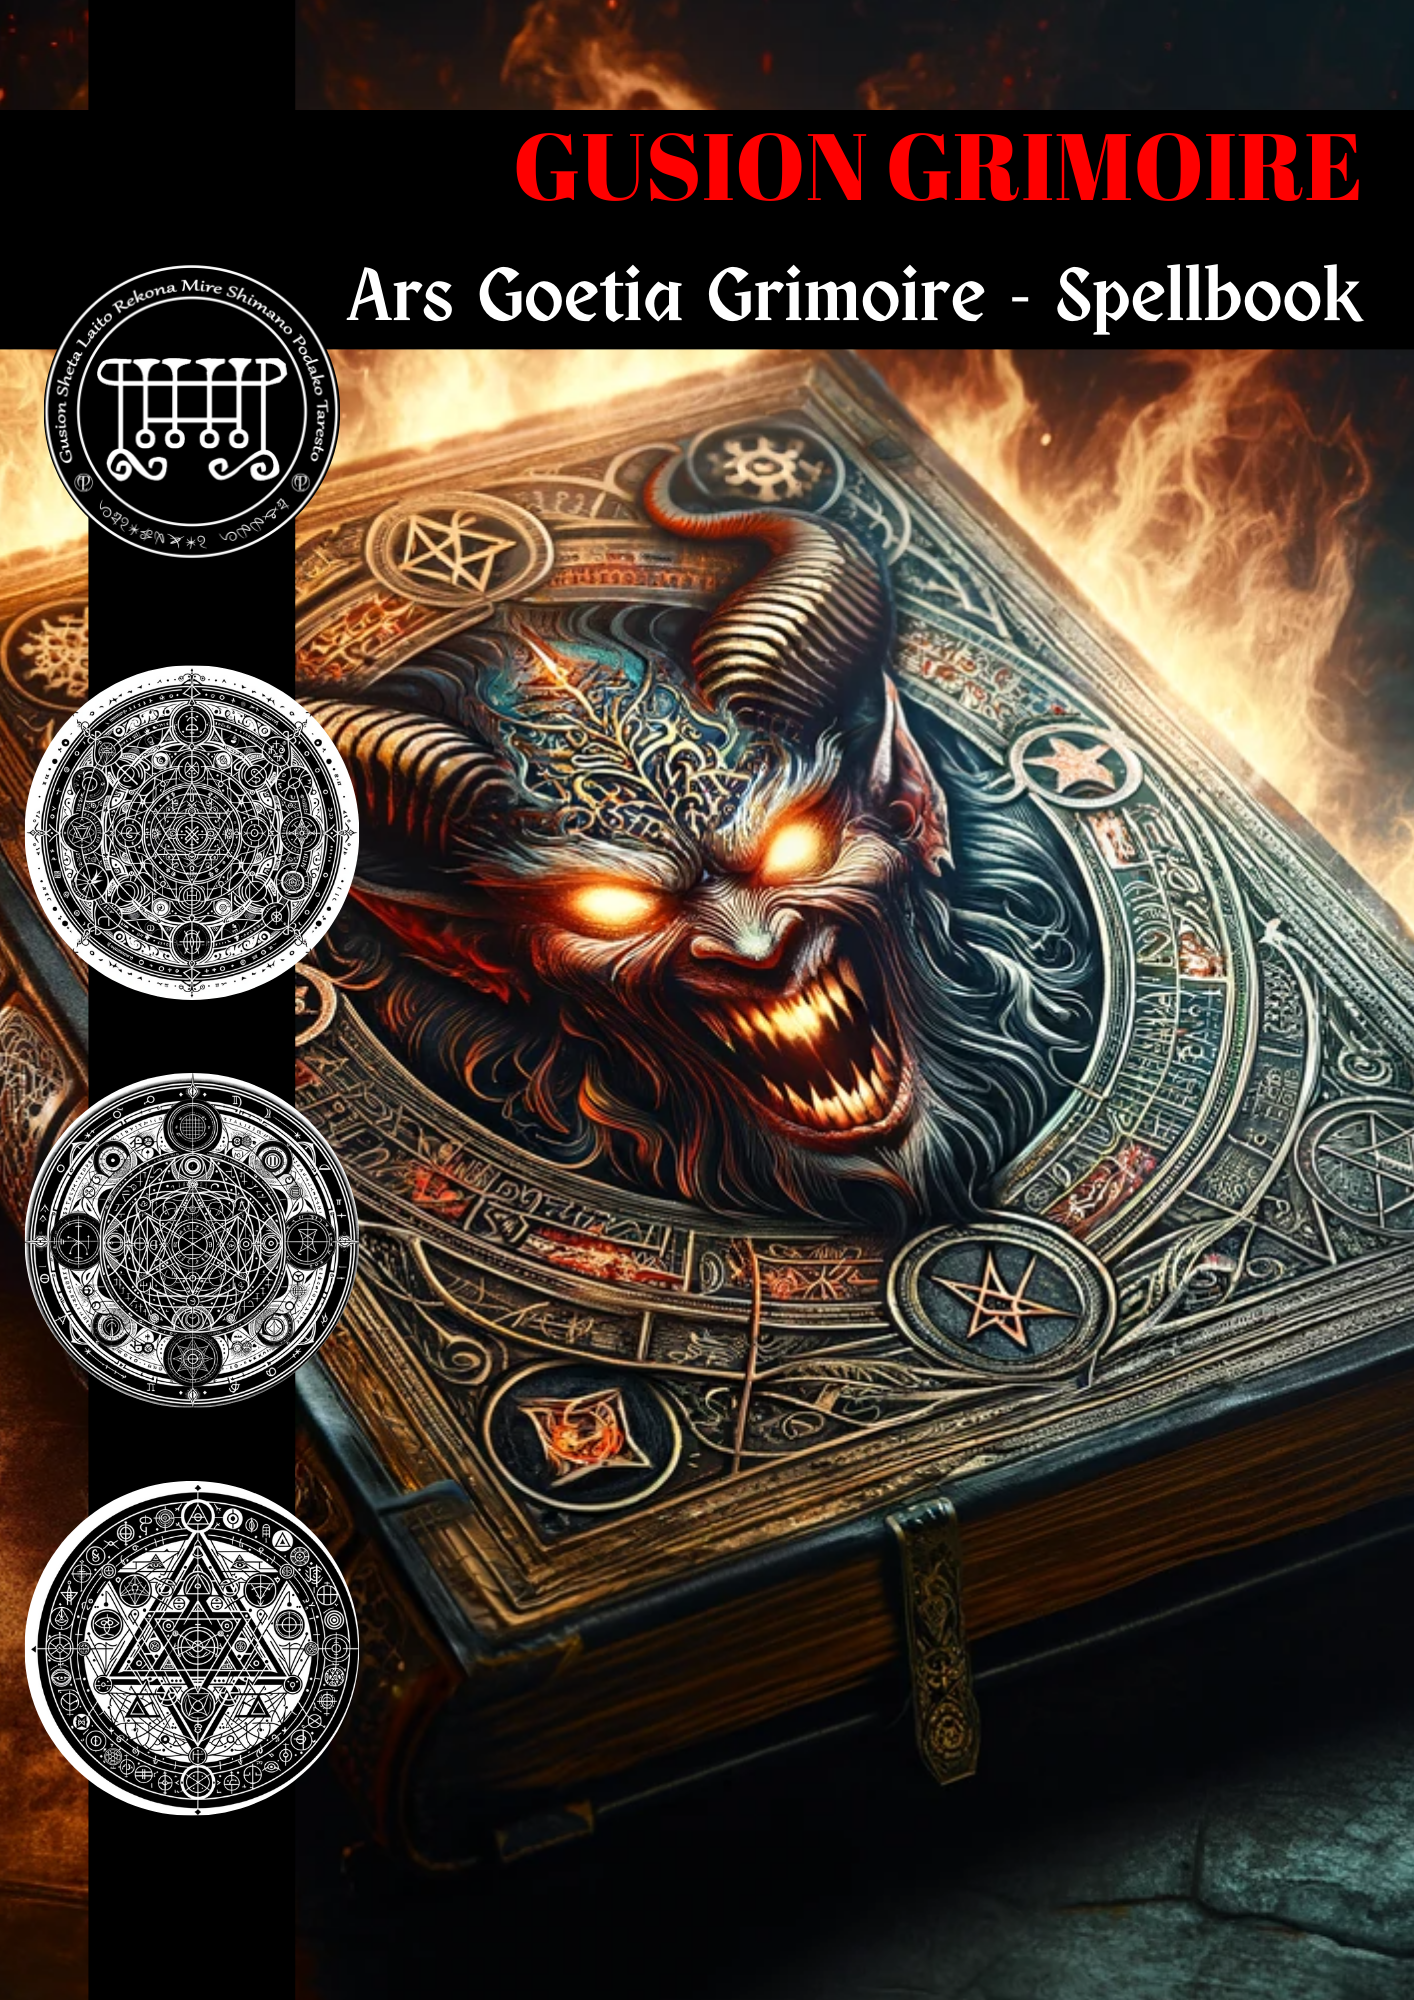 Grimoire of Gusion Spells & Rituals for inner development - Abraxas Amulets ® Magic ♾️ Talismans ♾️ Initiations